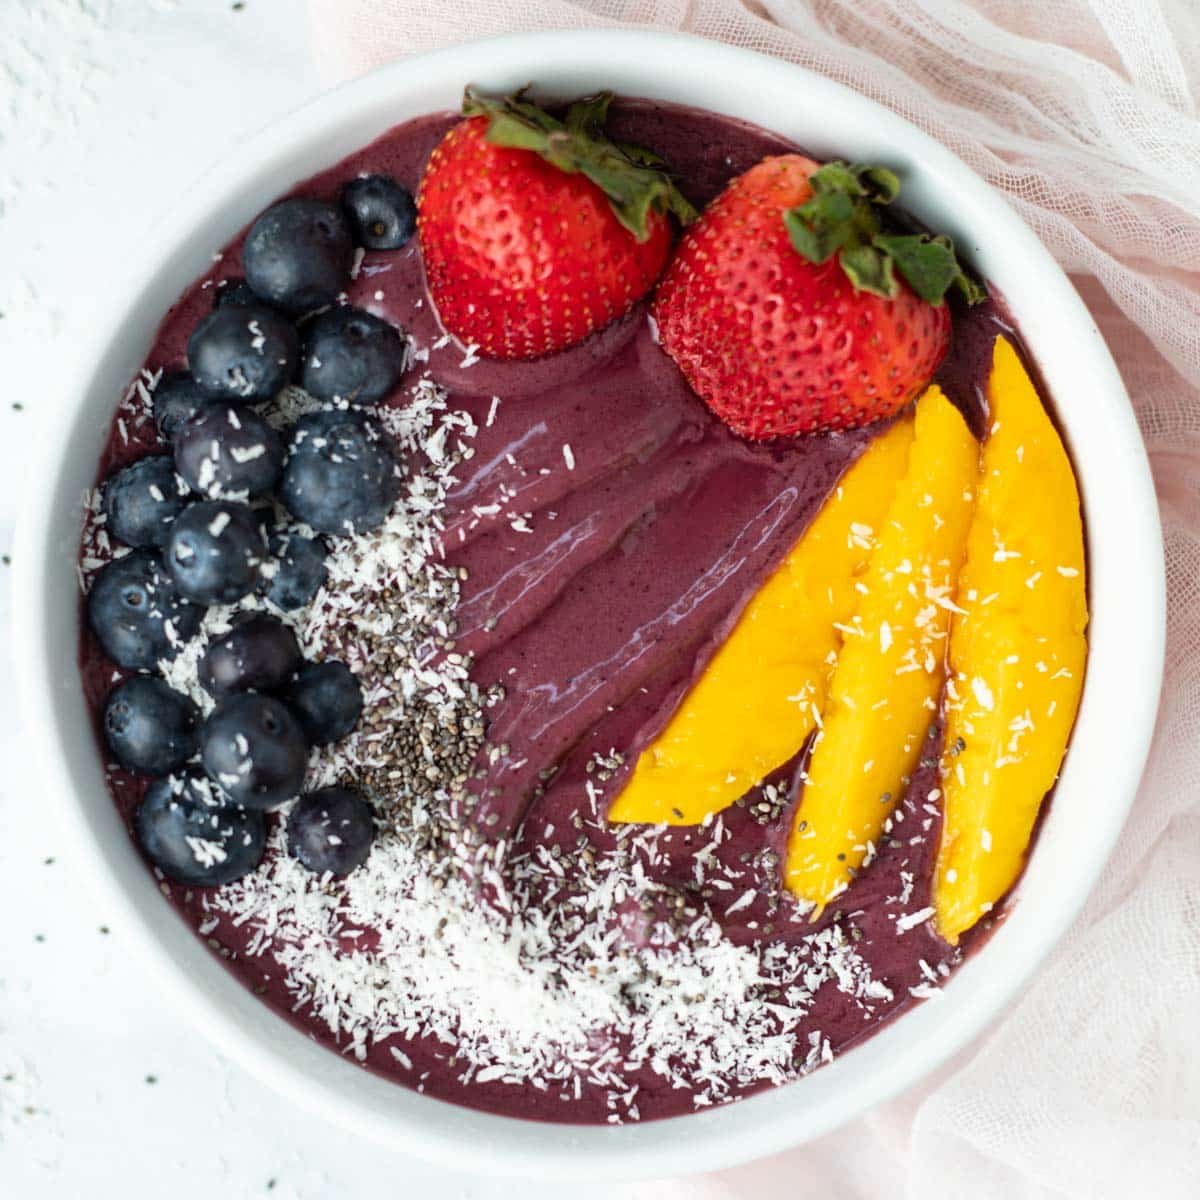 Acai bowl topped with fresh blueberries, strawberries, mango, coconut flakes, and chia seeds.